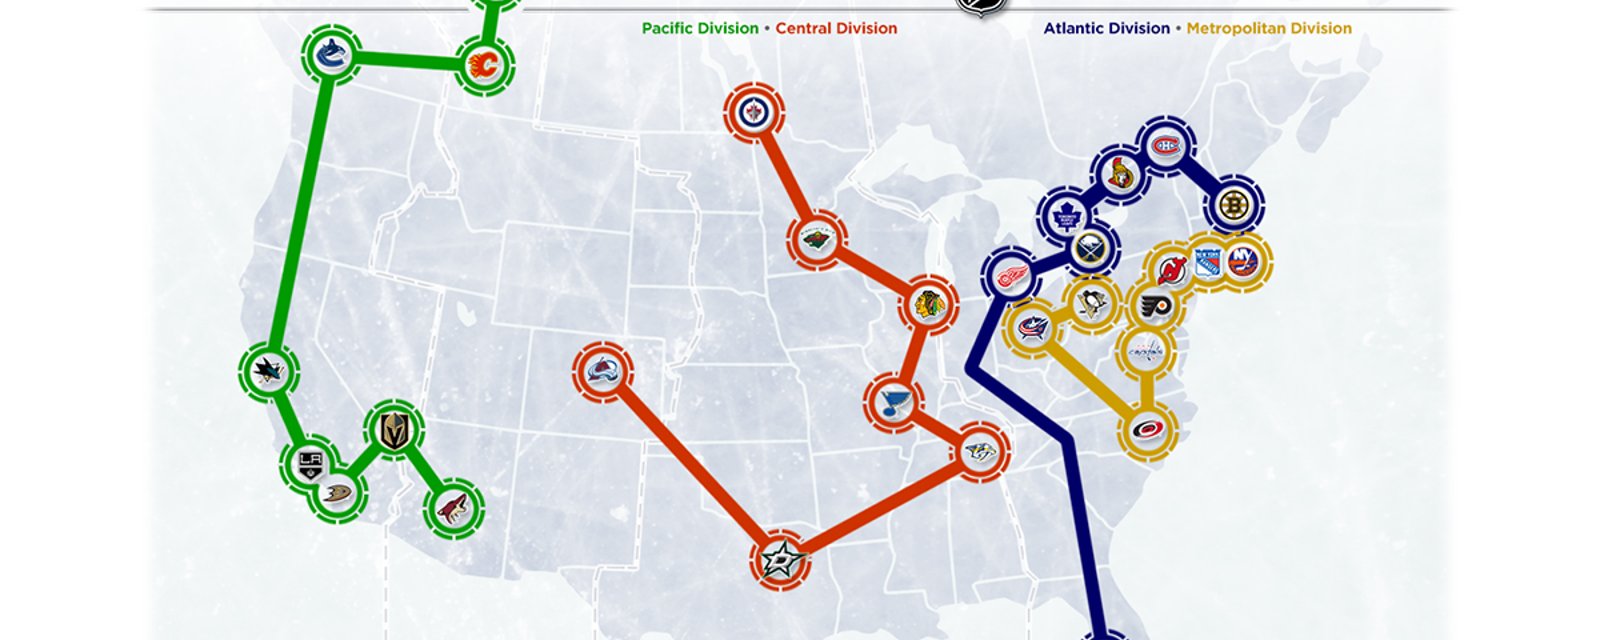 Report: NHL re-alignment plan leaked